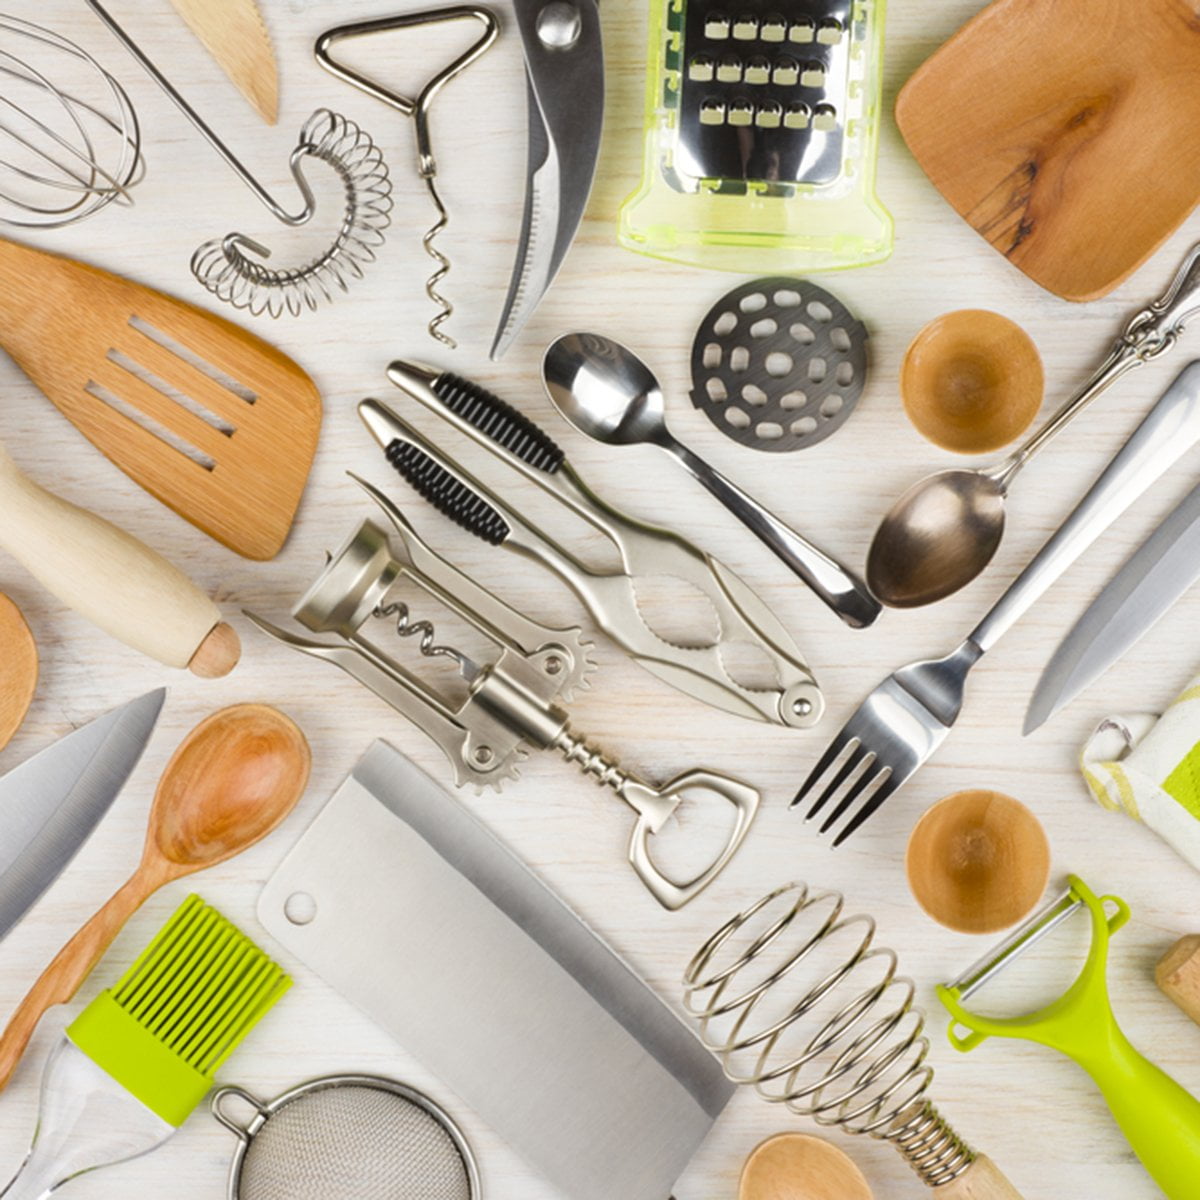 List of Everyday Kitchen Items You Should Have